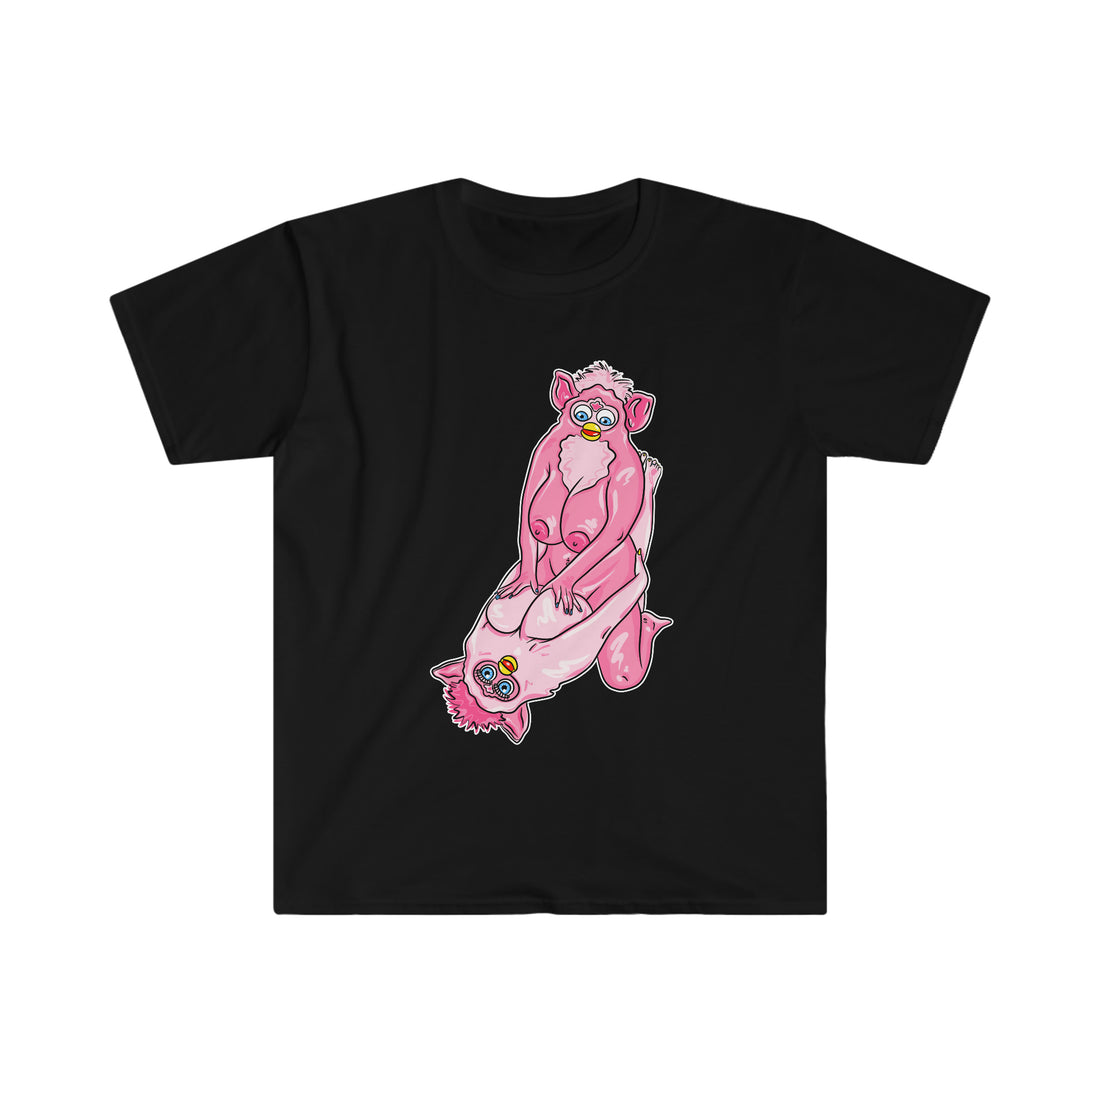 FURBY STRADDLE PARTY - Unisex Shirt